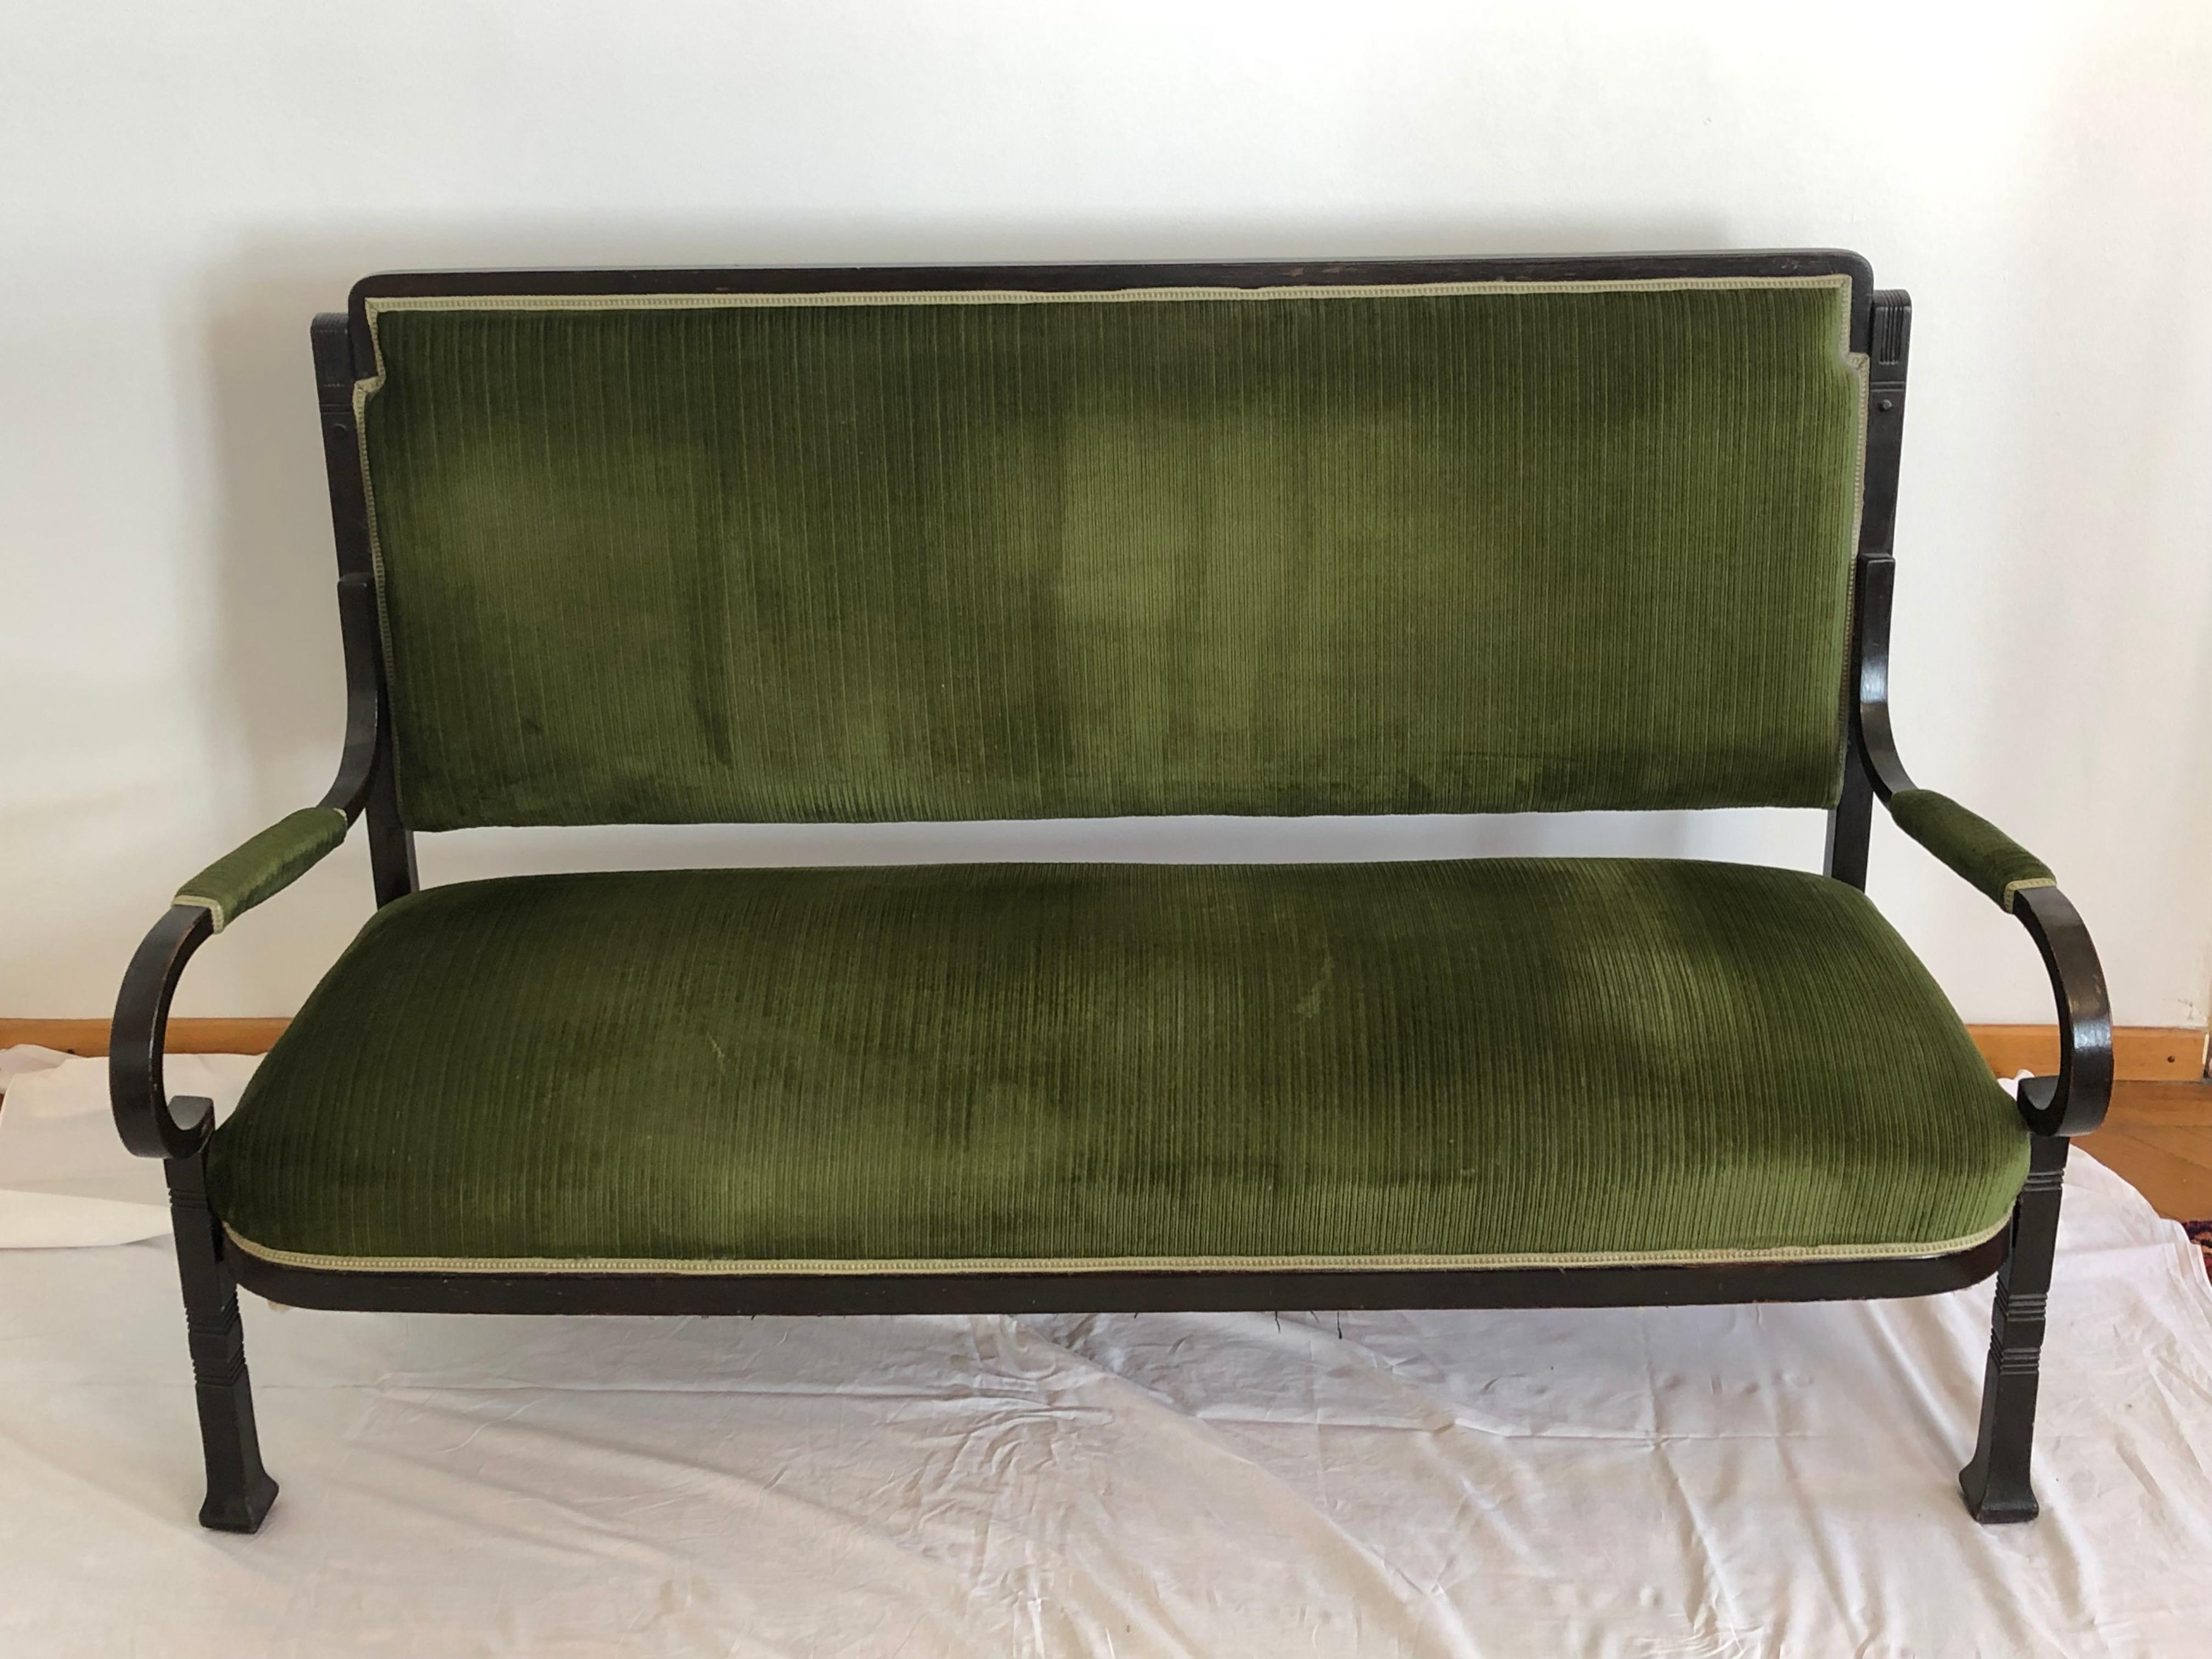 Beech bentwood frame with upholstered sear and backrest. Made by Thonet Austria circa 1900.
Original unrestored condition.Complete, professional restoration/upholstery is on request possible.   
   
   